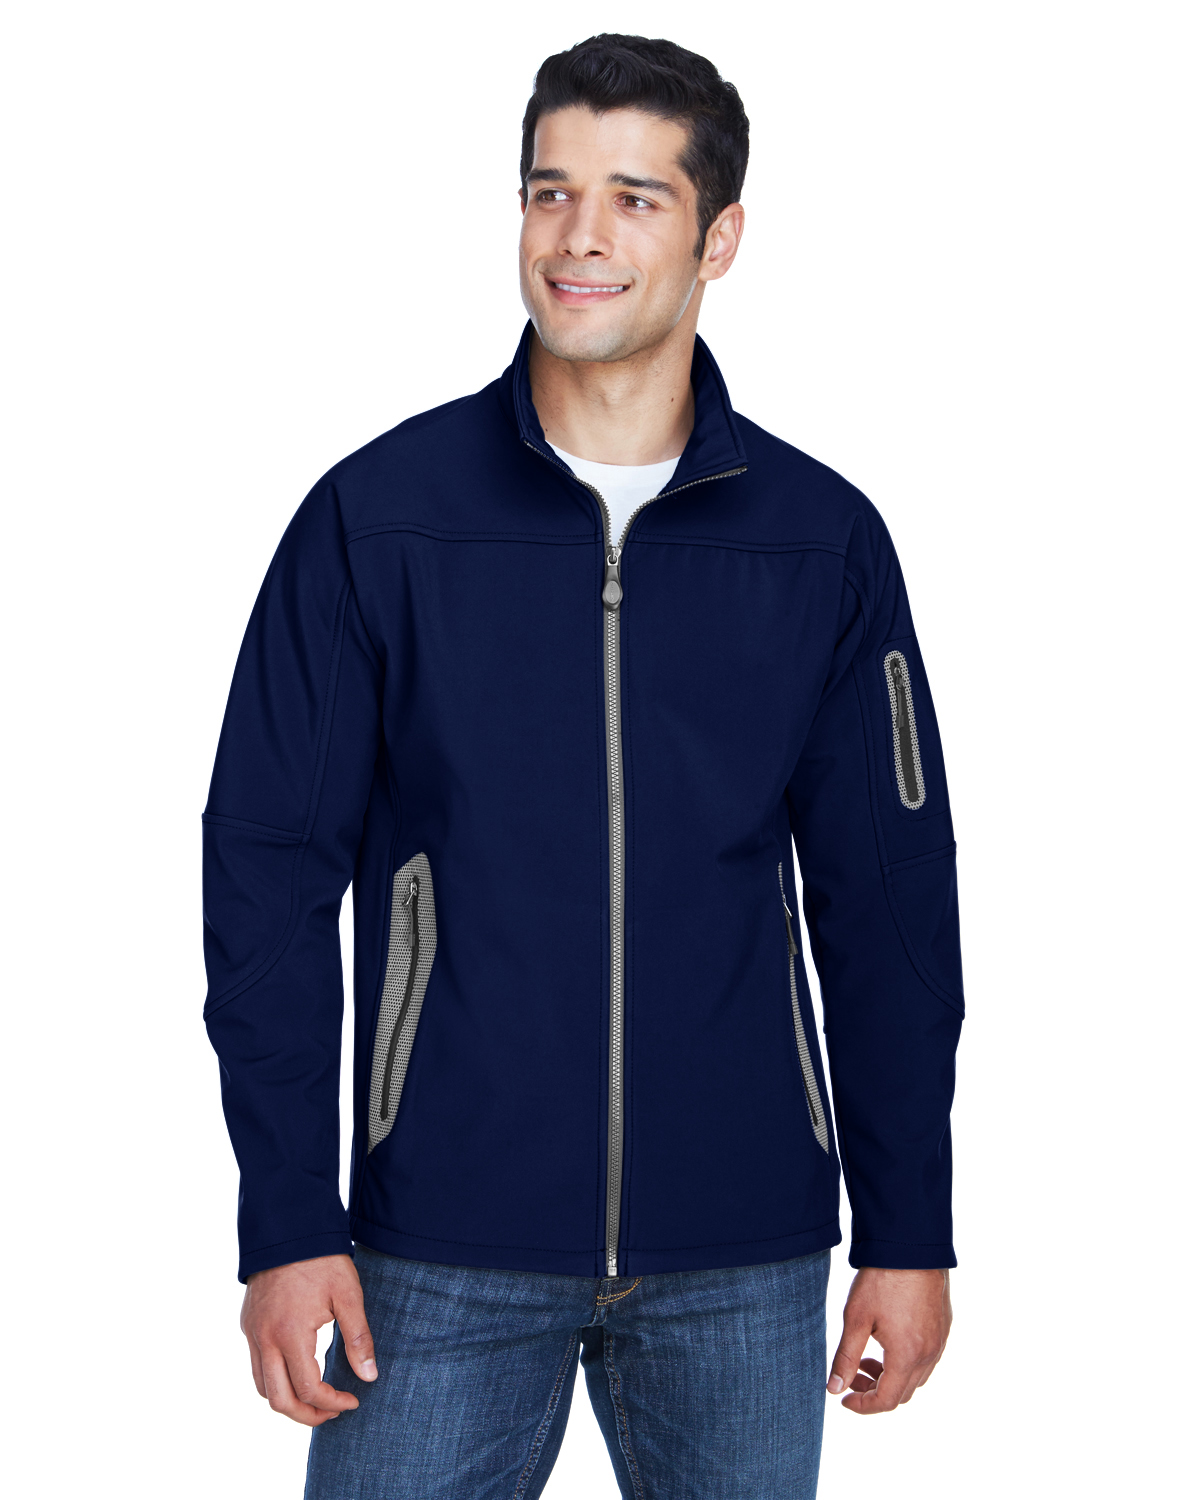 Men's Three-Layer Fleece Bonded Soft Shell Technical Jacket - CLASSIC NAVY - S - image 1 of 3